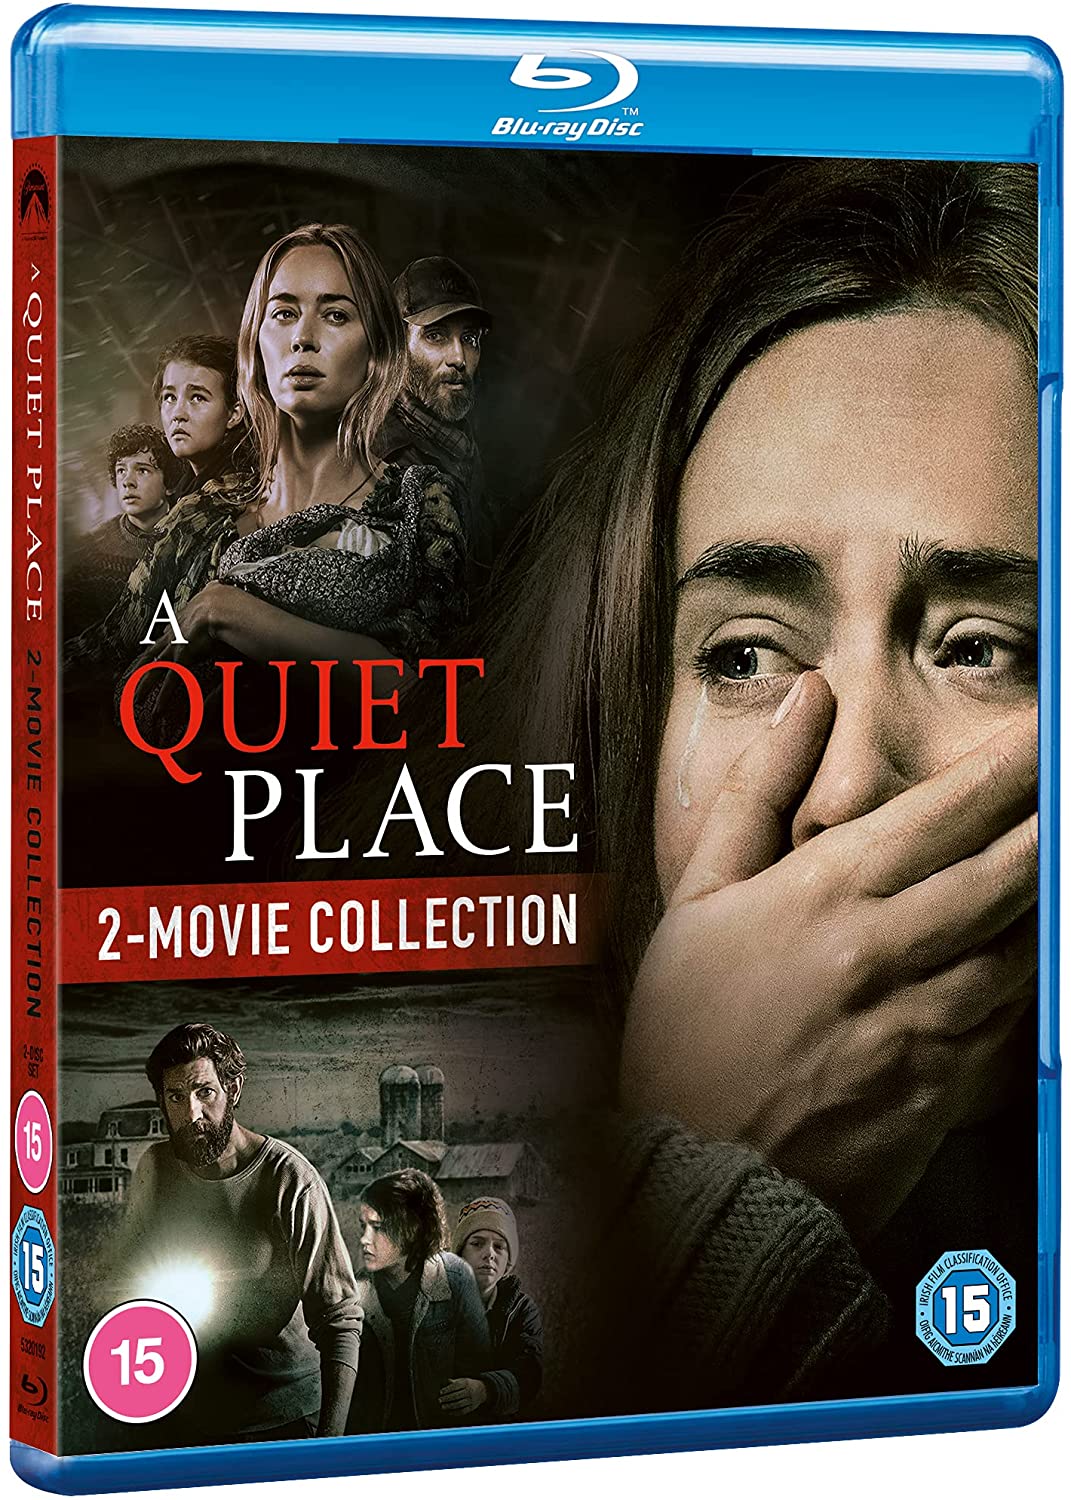 A Quiet Place Part I and Part II: 2-movie collection - Horror/Sci-fi [Blu-ray]